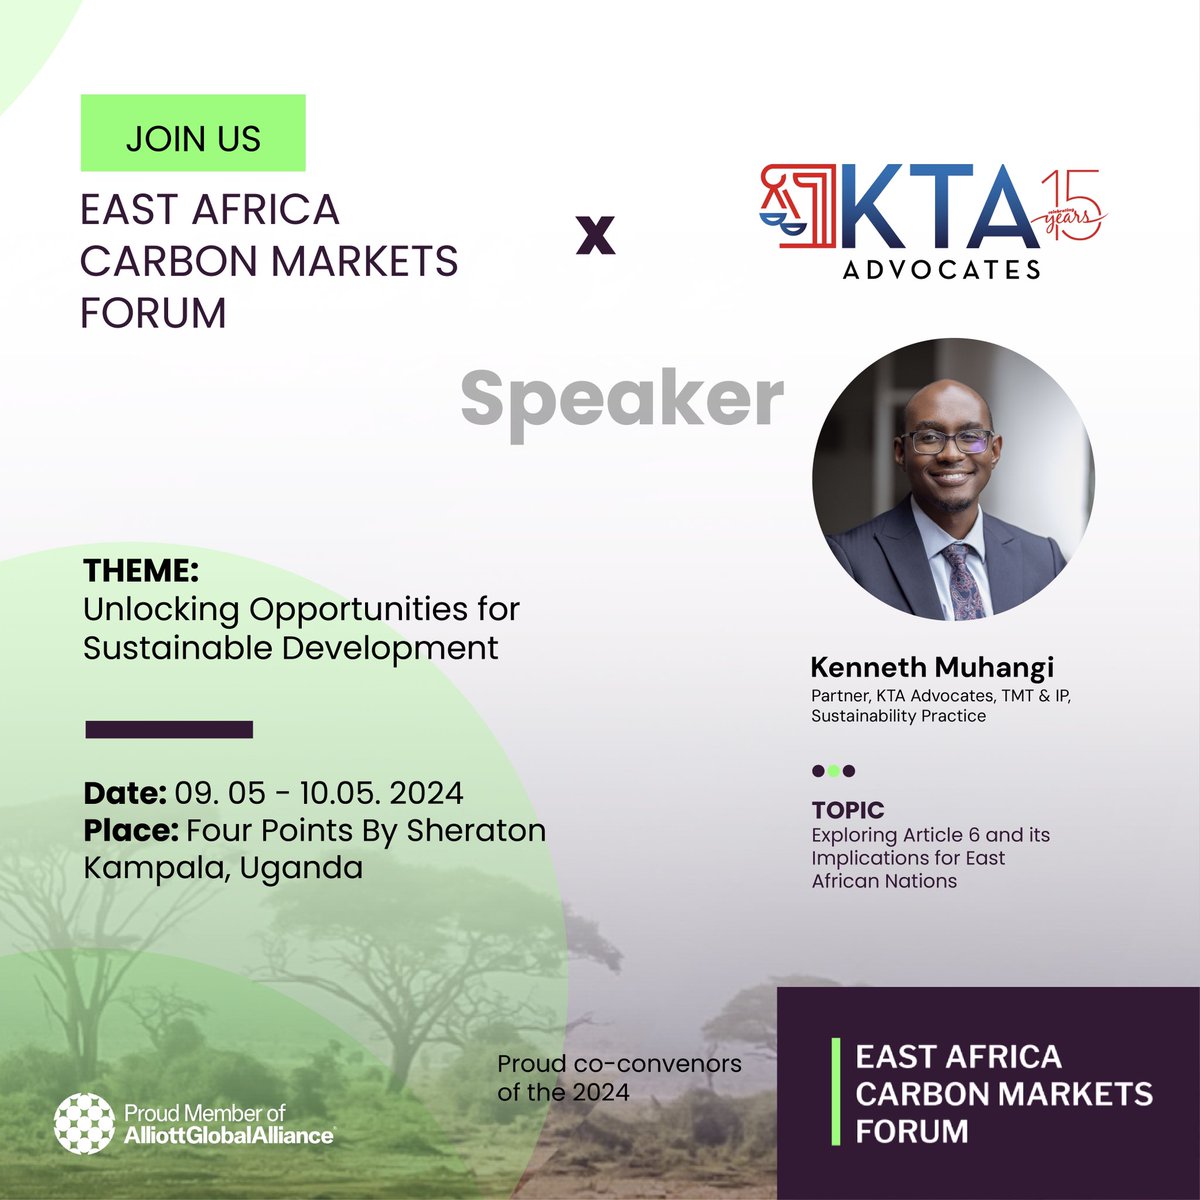 We’re excited to have our partner, @xcenneth speak at the @EAcarbonmarkets, a platform for actionable discussions around the region’s carbon markets. He will deep dive into all the aspects of Article 6 and its implications for East African nations.

#KTAat15 #EACMF2024